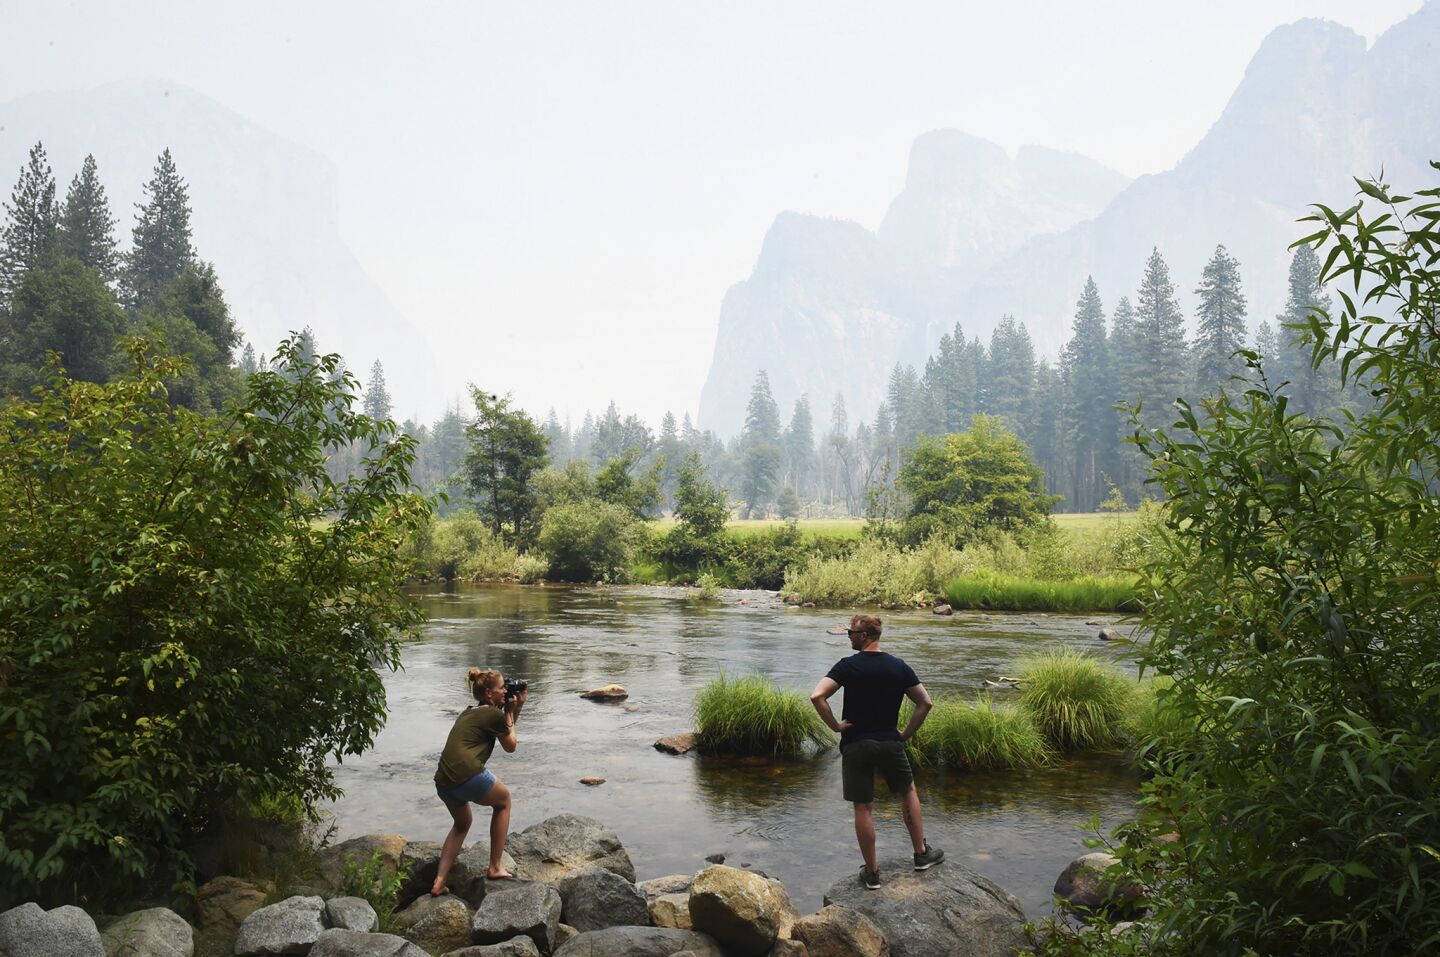 German tourist Stephanie Schultz, left, photographs Kai Rudolph along the Merced River in Yosemite Valley as smoke from the Ferguson fire hangs in the air in Yosemite National Park.